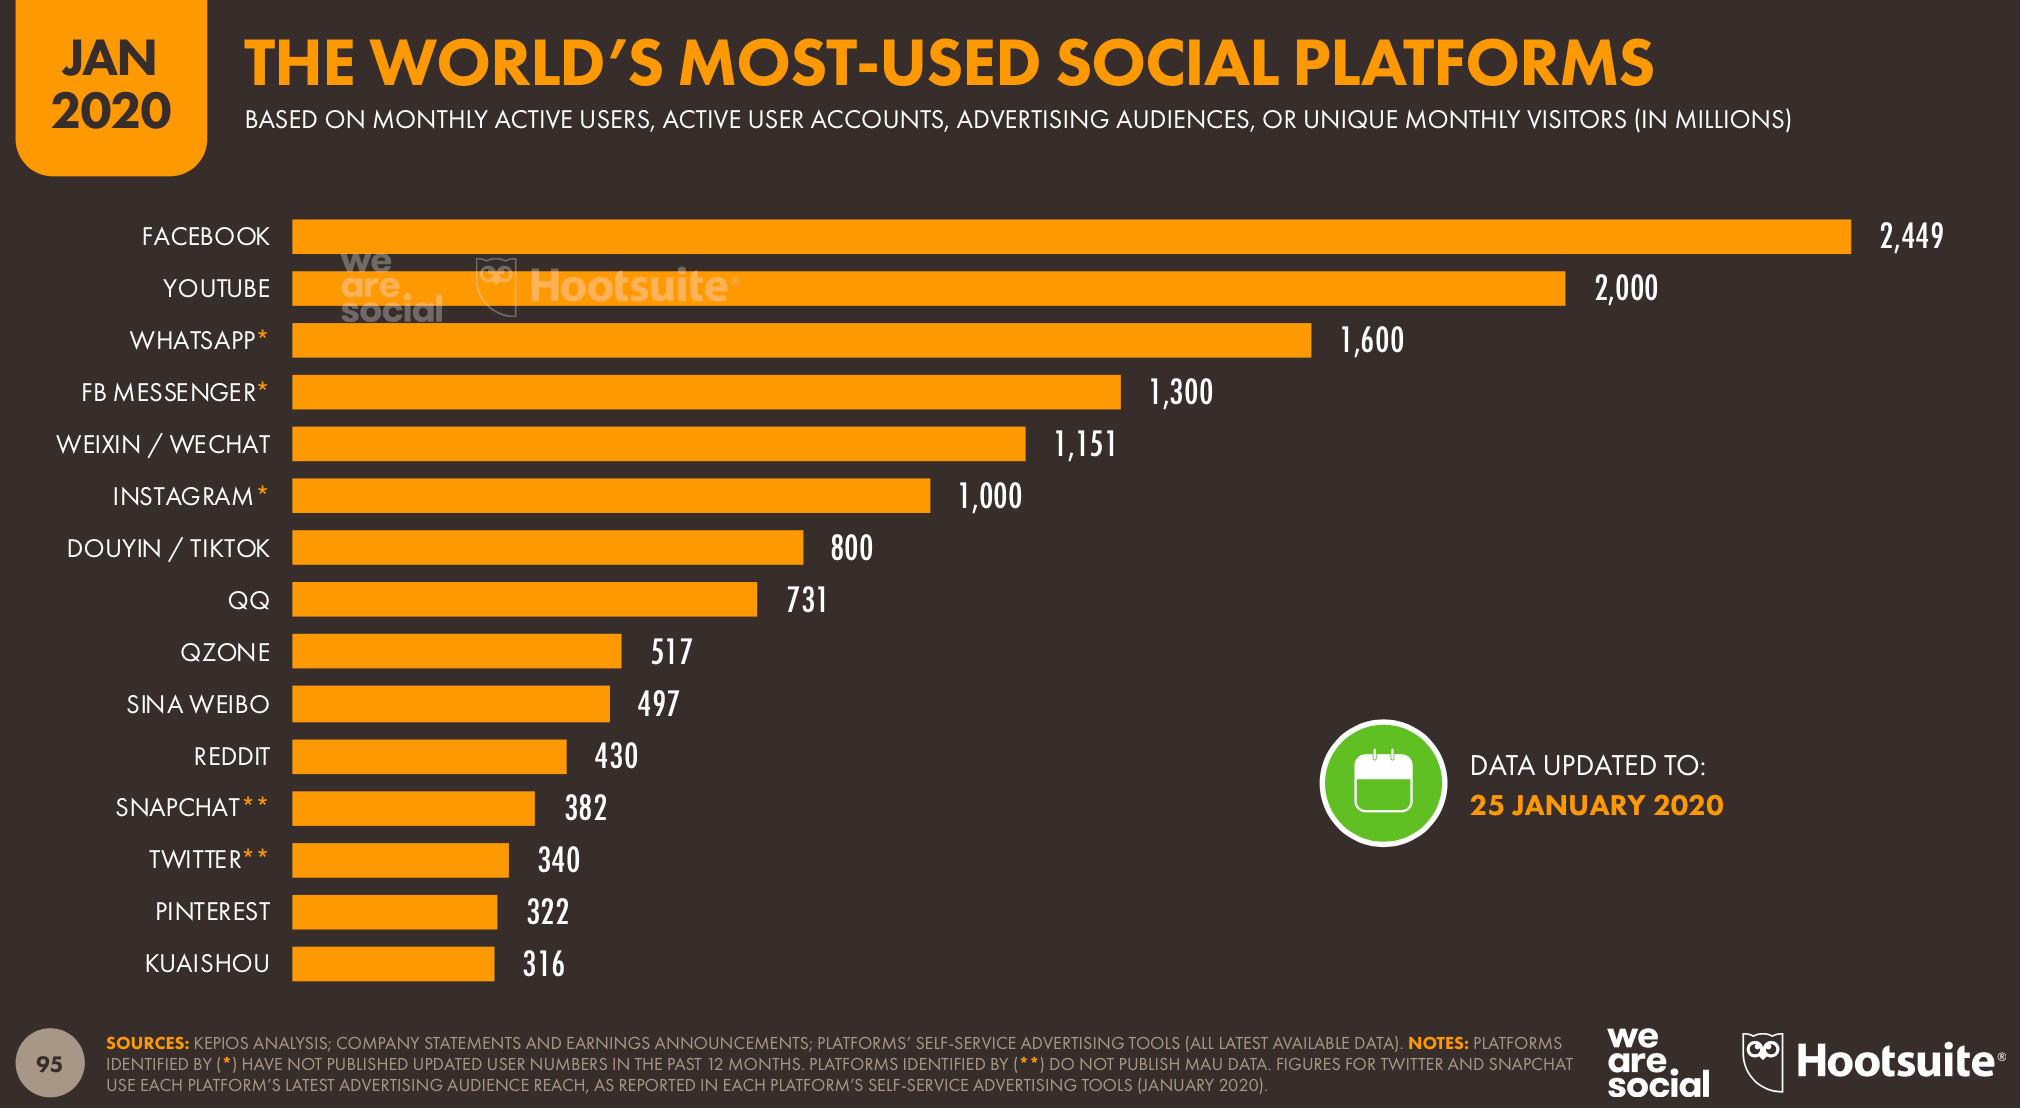 The top social media platforms used by digital marketers